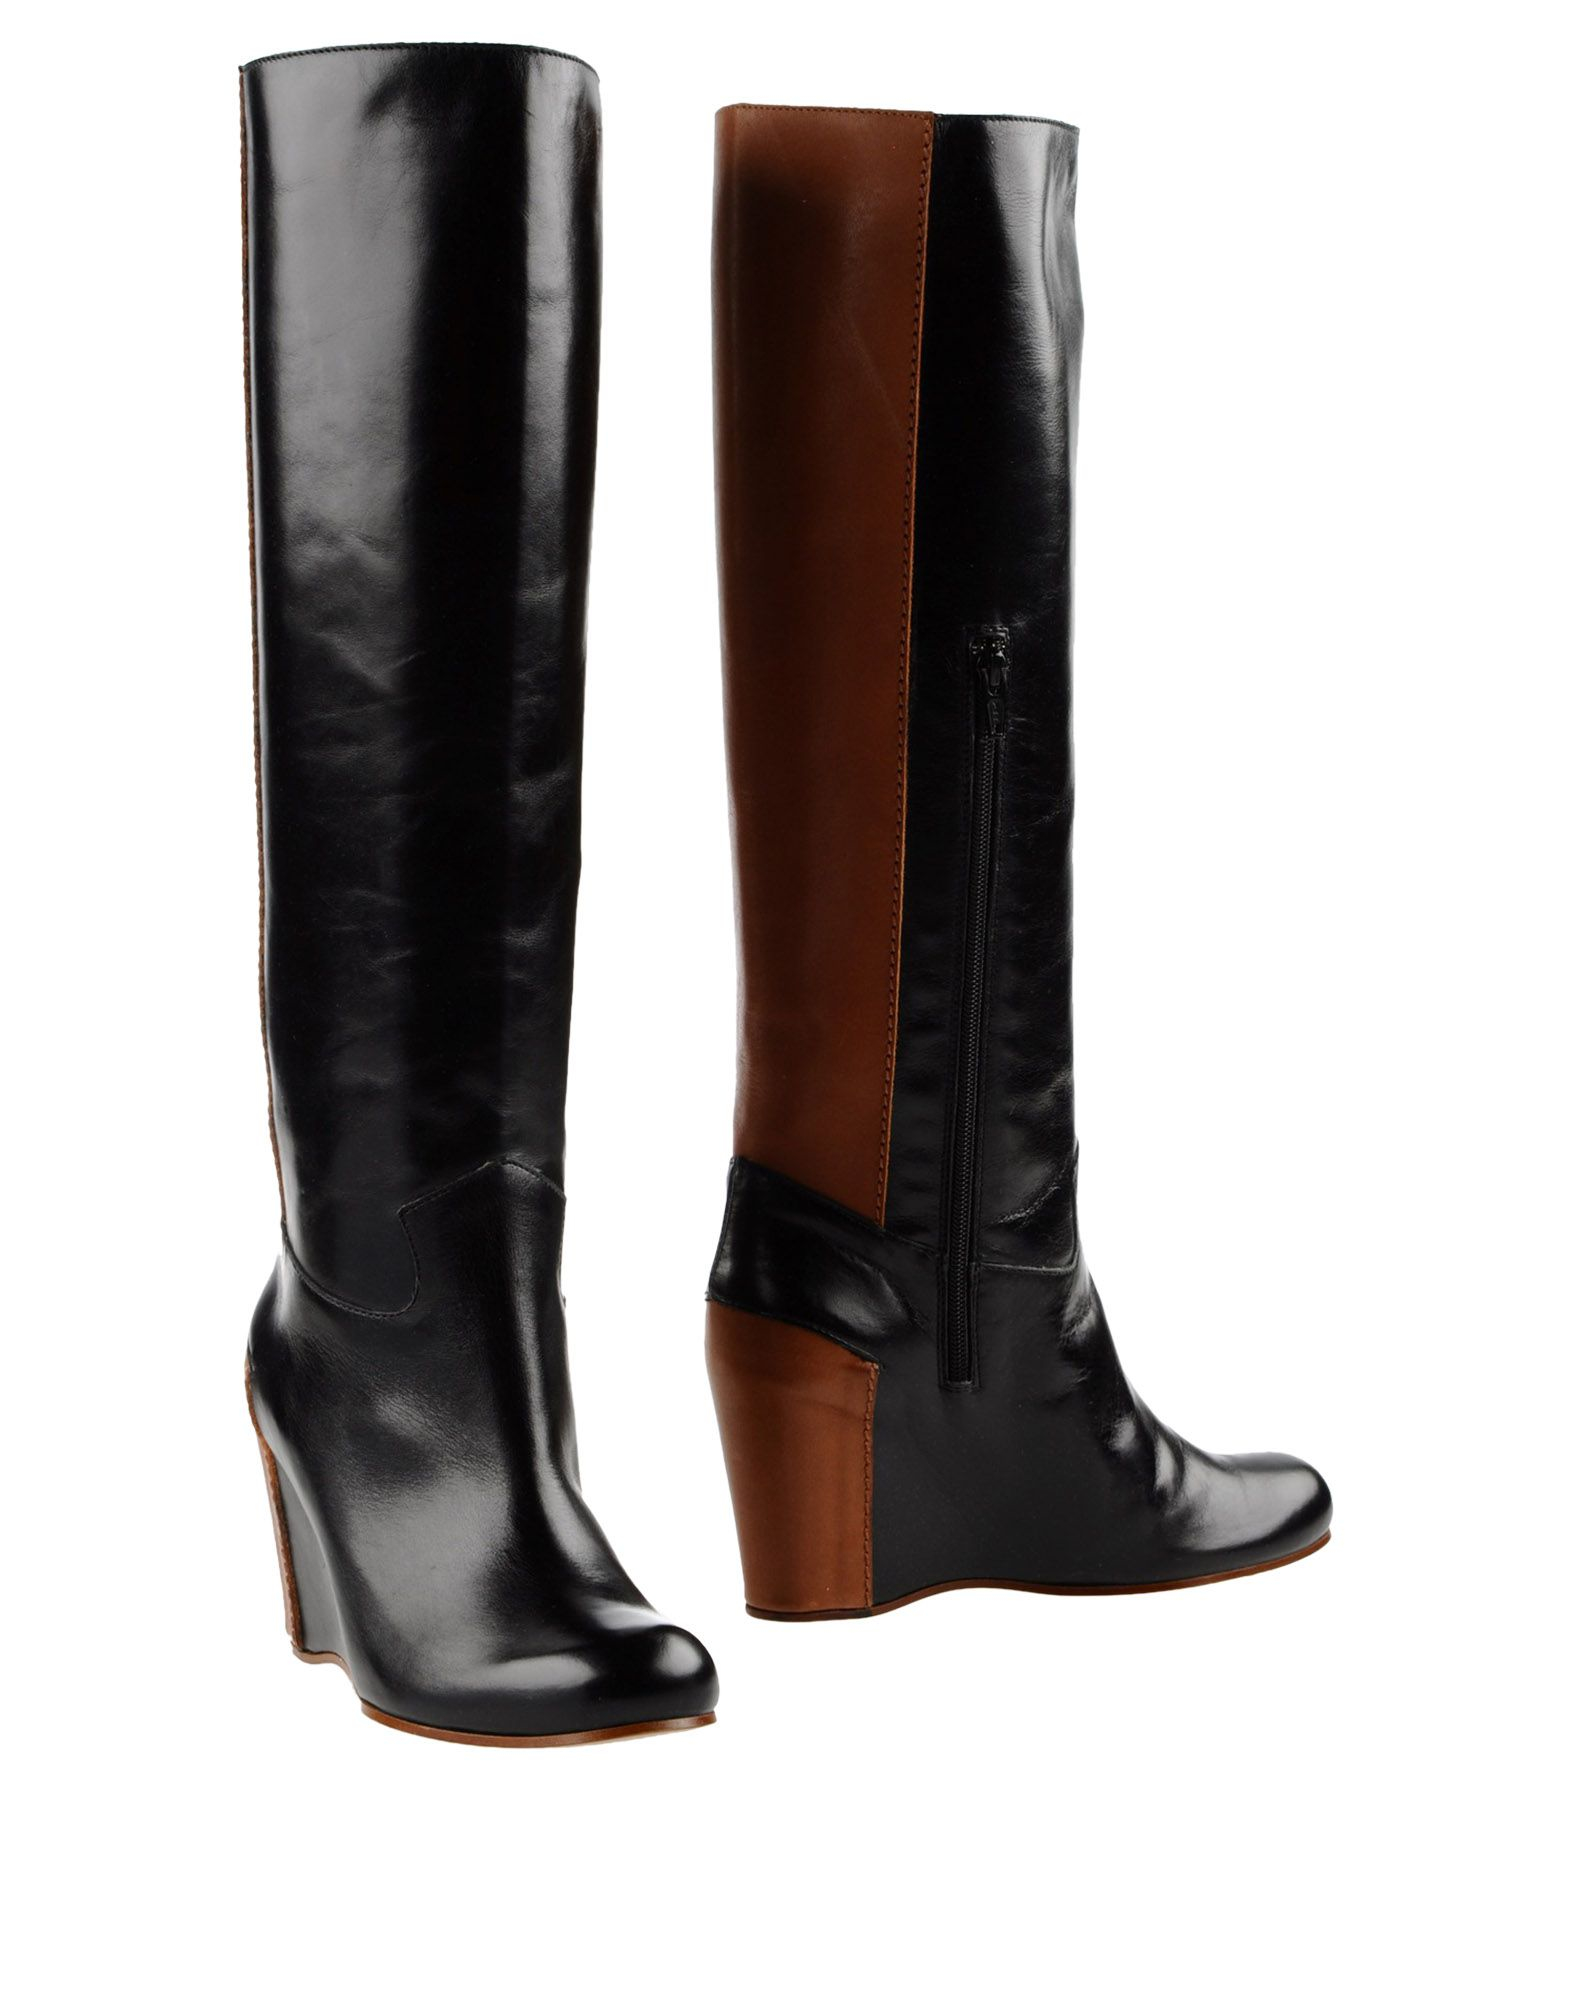 Mm6 by maison martin margiela Boots in Black